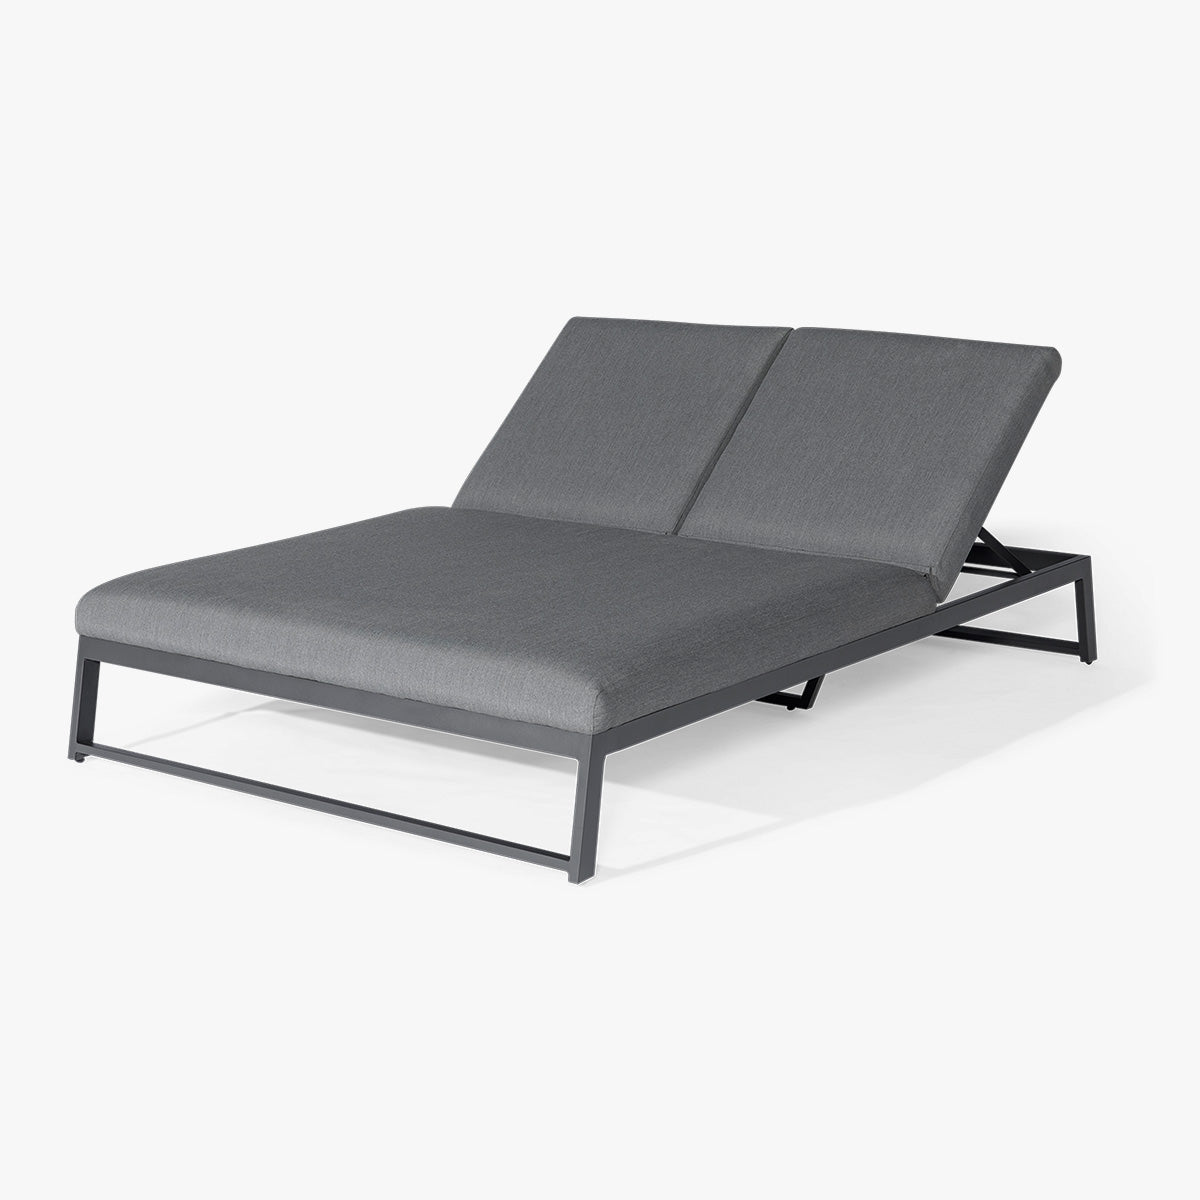 Outdoor Fabric Allure Double Sunlounger